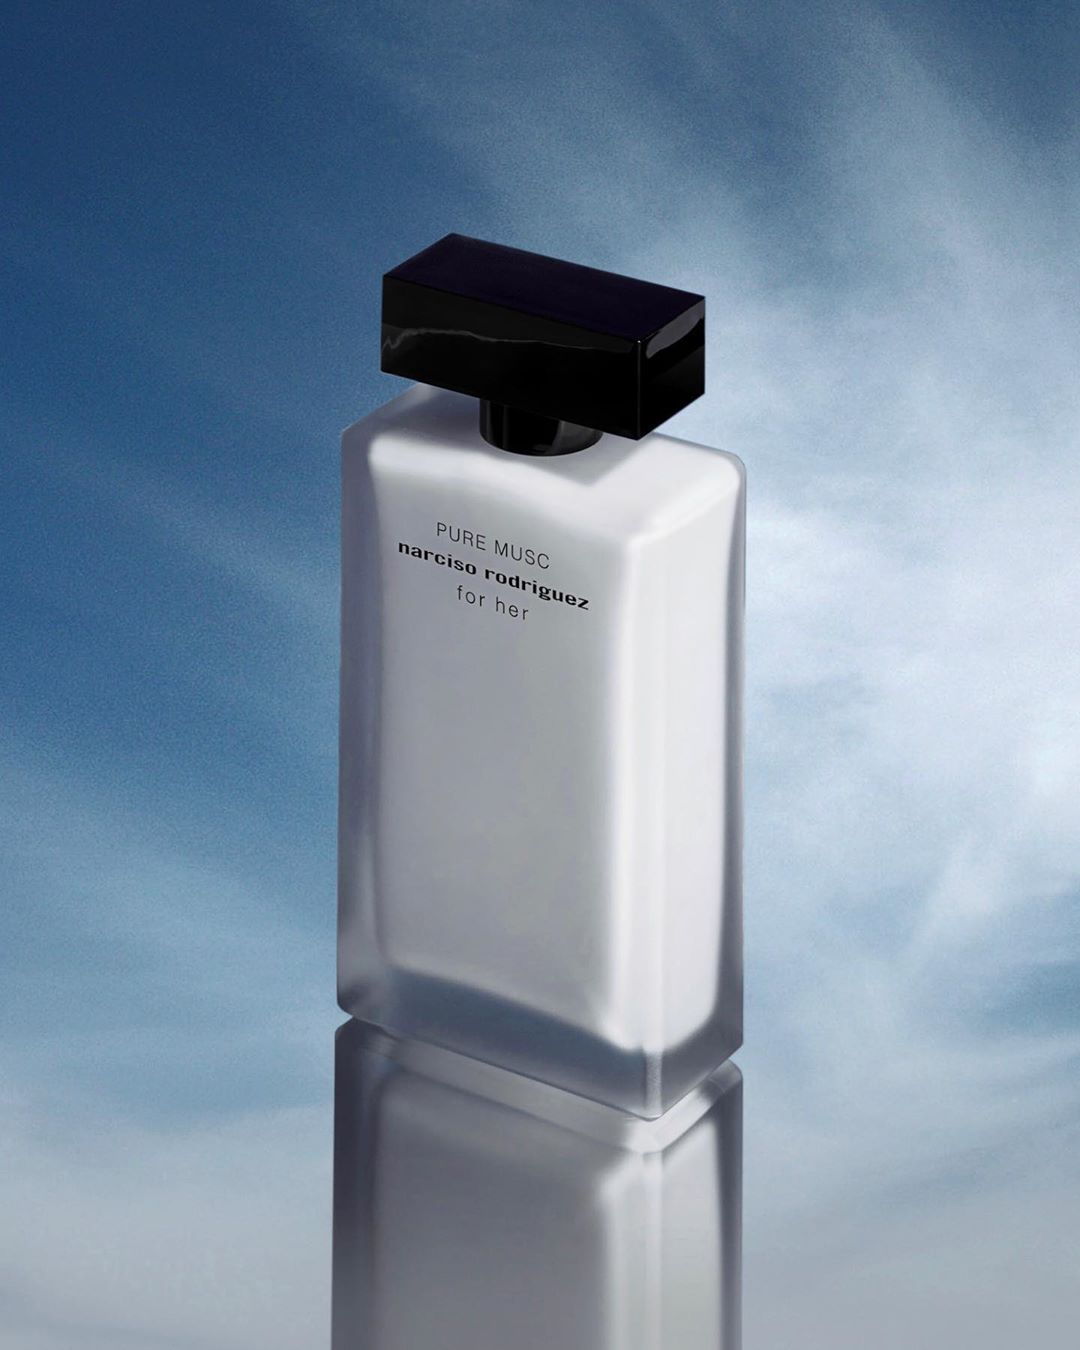 narciso rodriguez - PURE MUSC: purely unforgettable.
#forher #puremusc #narcisorodriguezparfums #parfum #fragrance